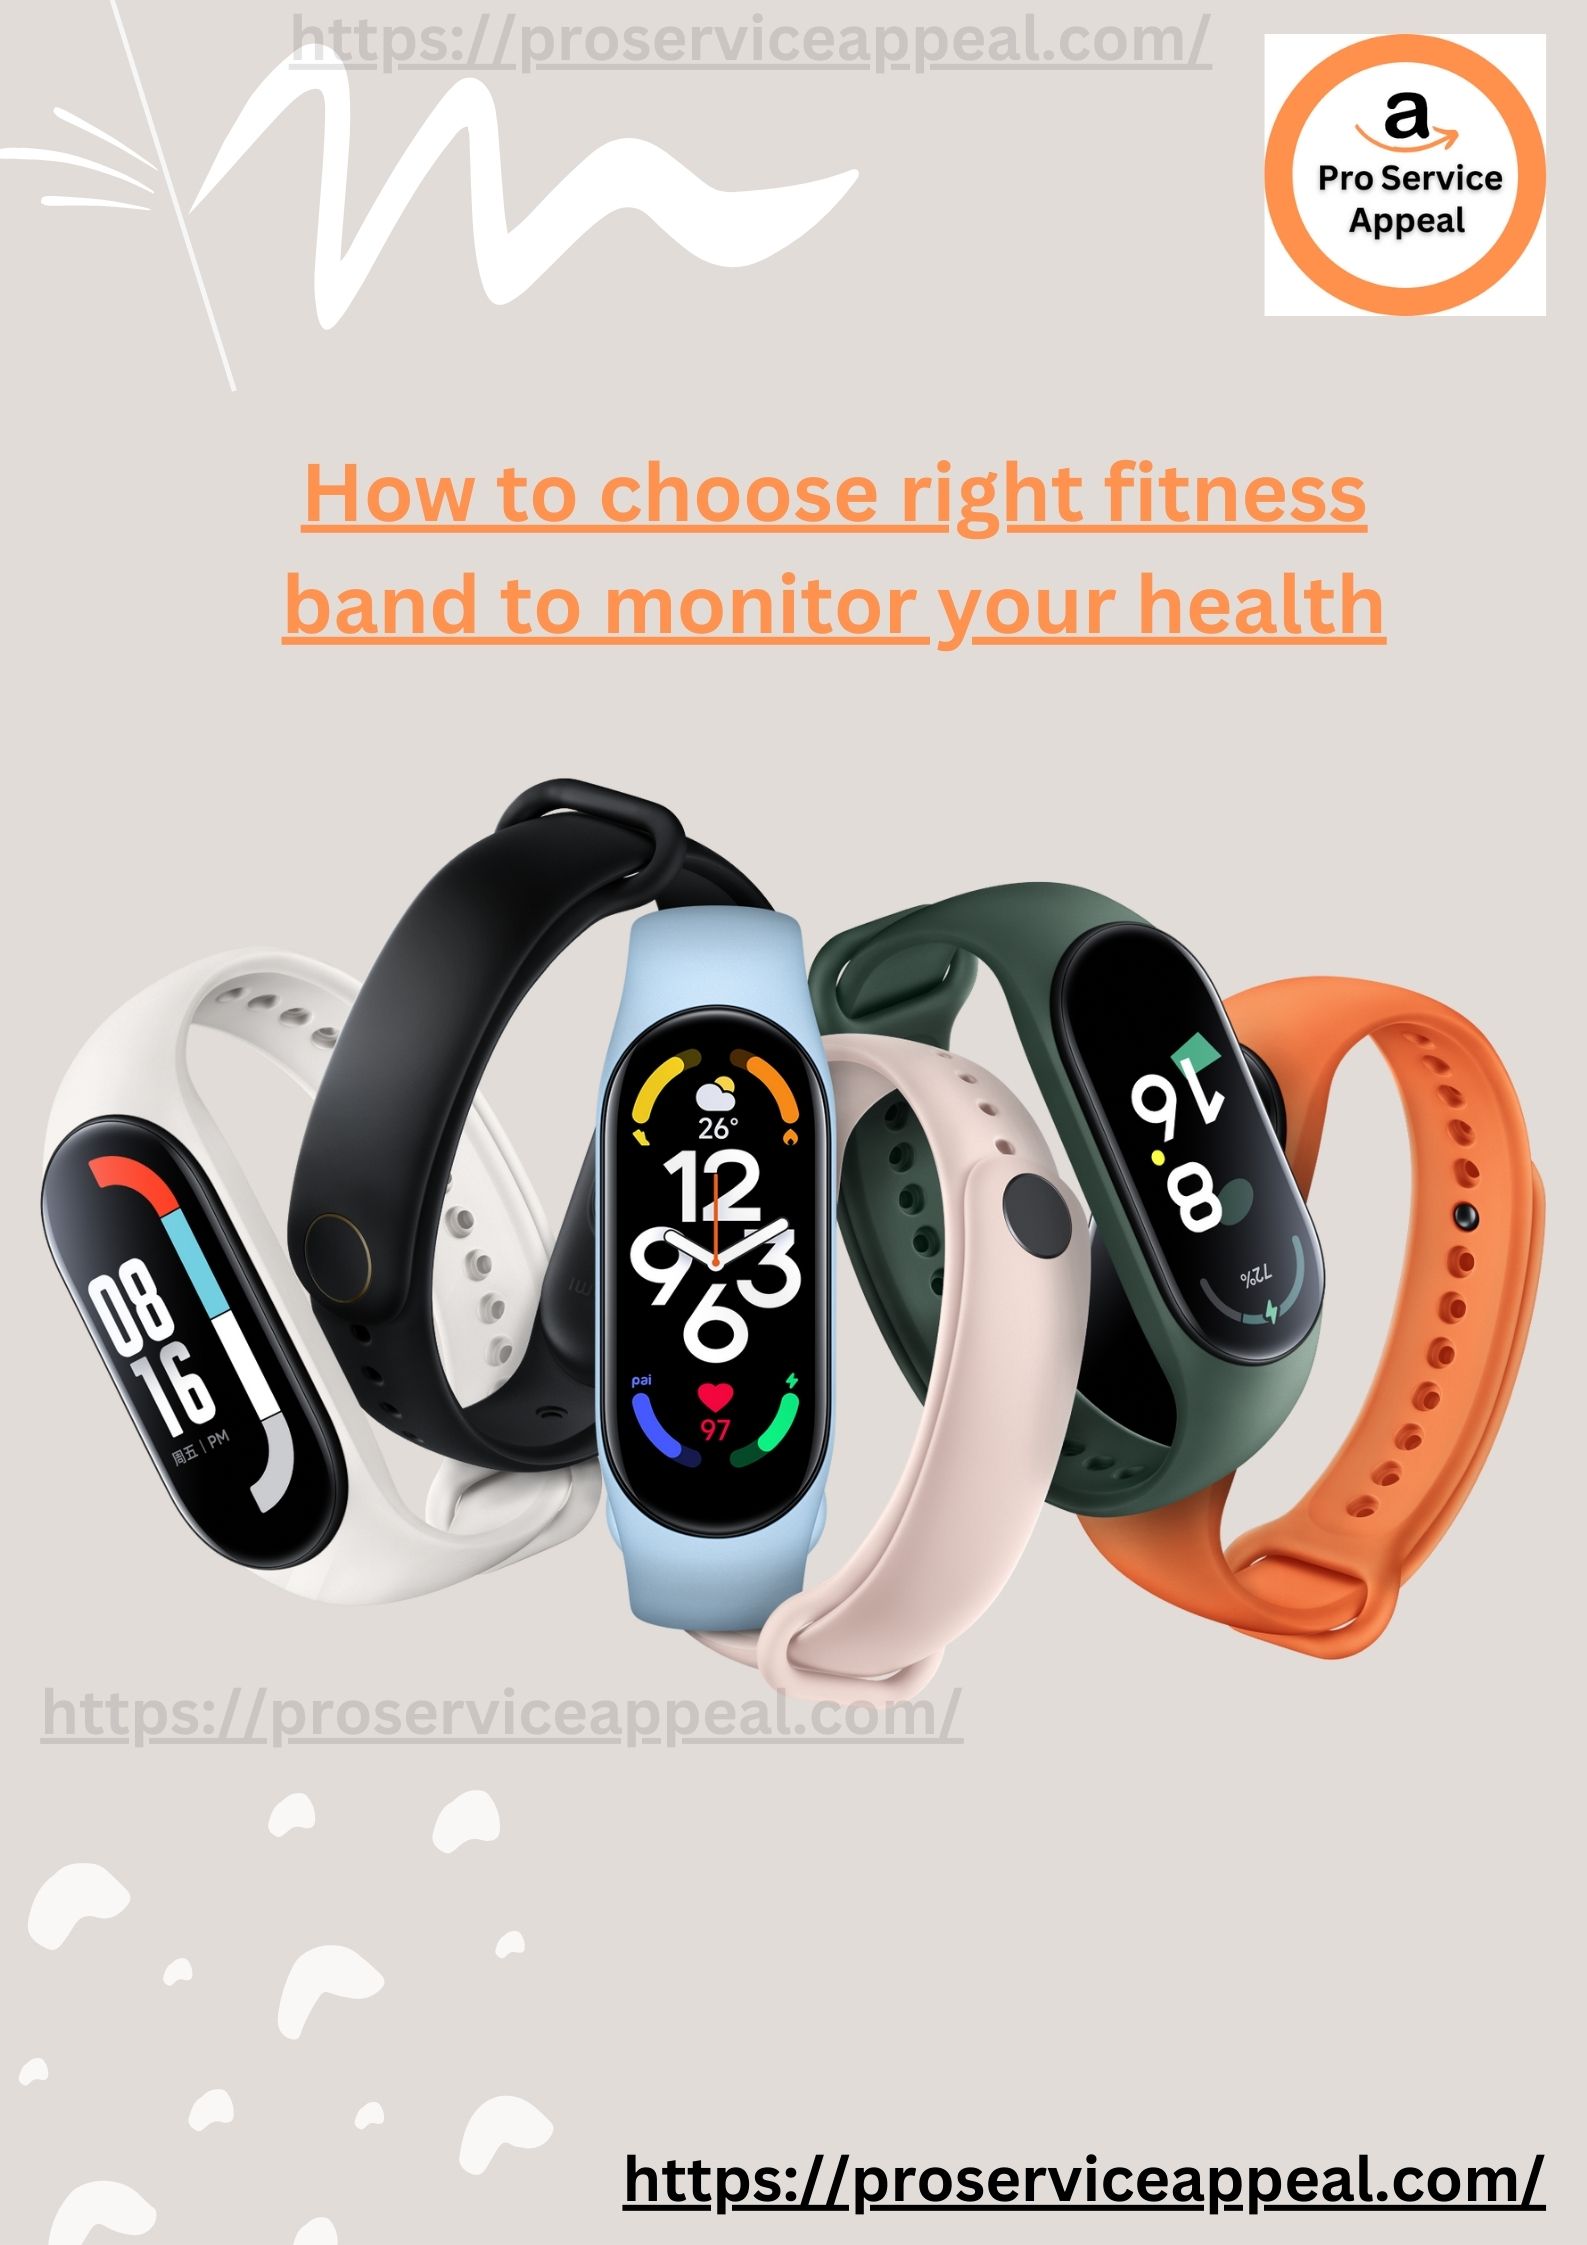 How to choose right fitness band to monitor your health